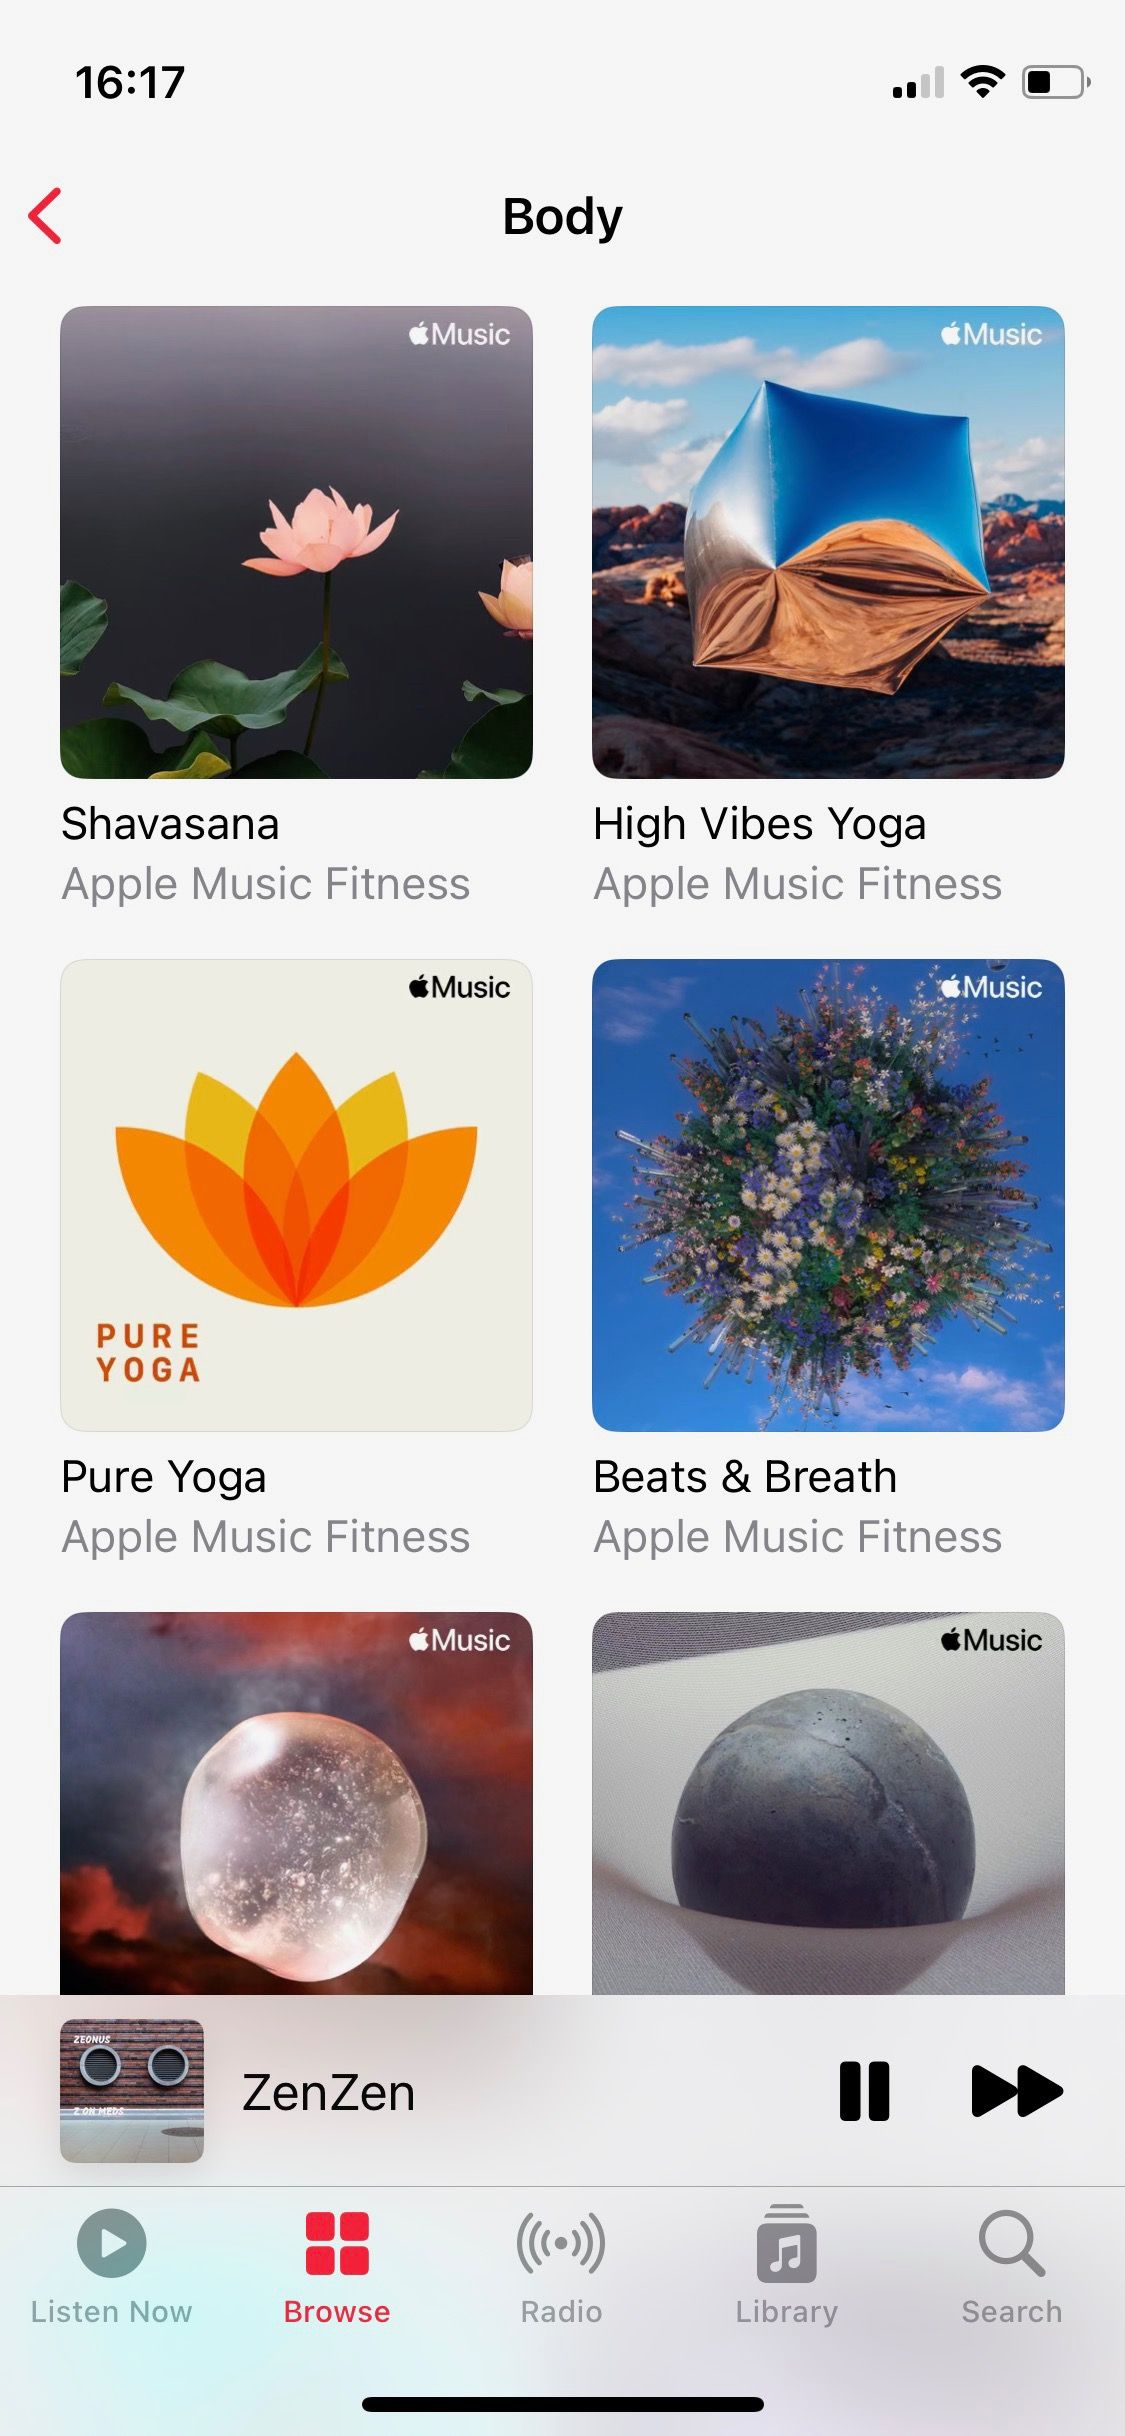 Screenshot of Apple Music Wellbeing Body section